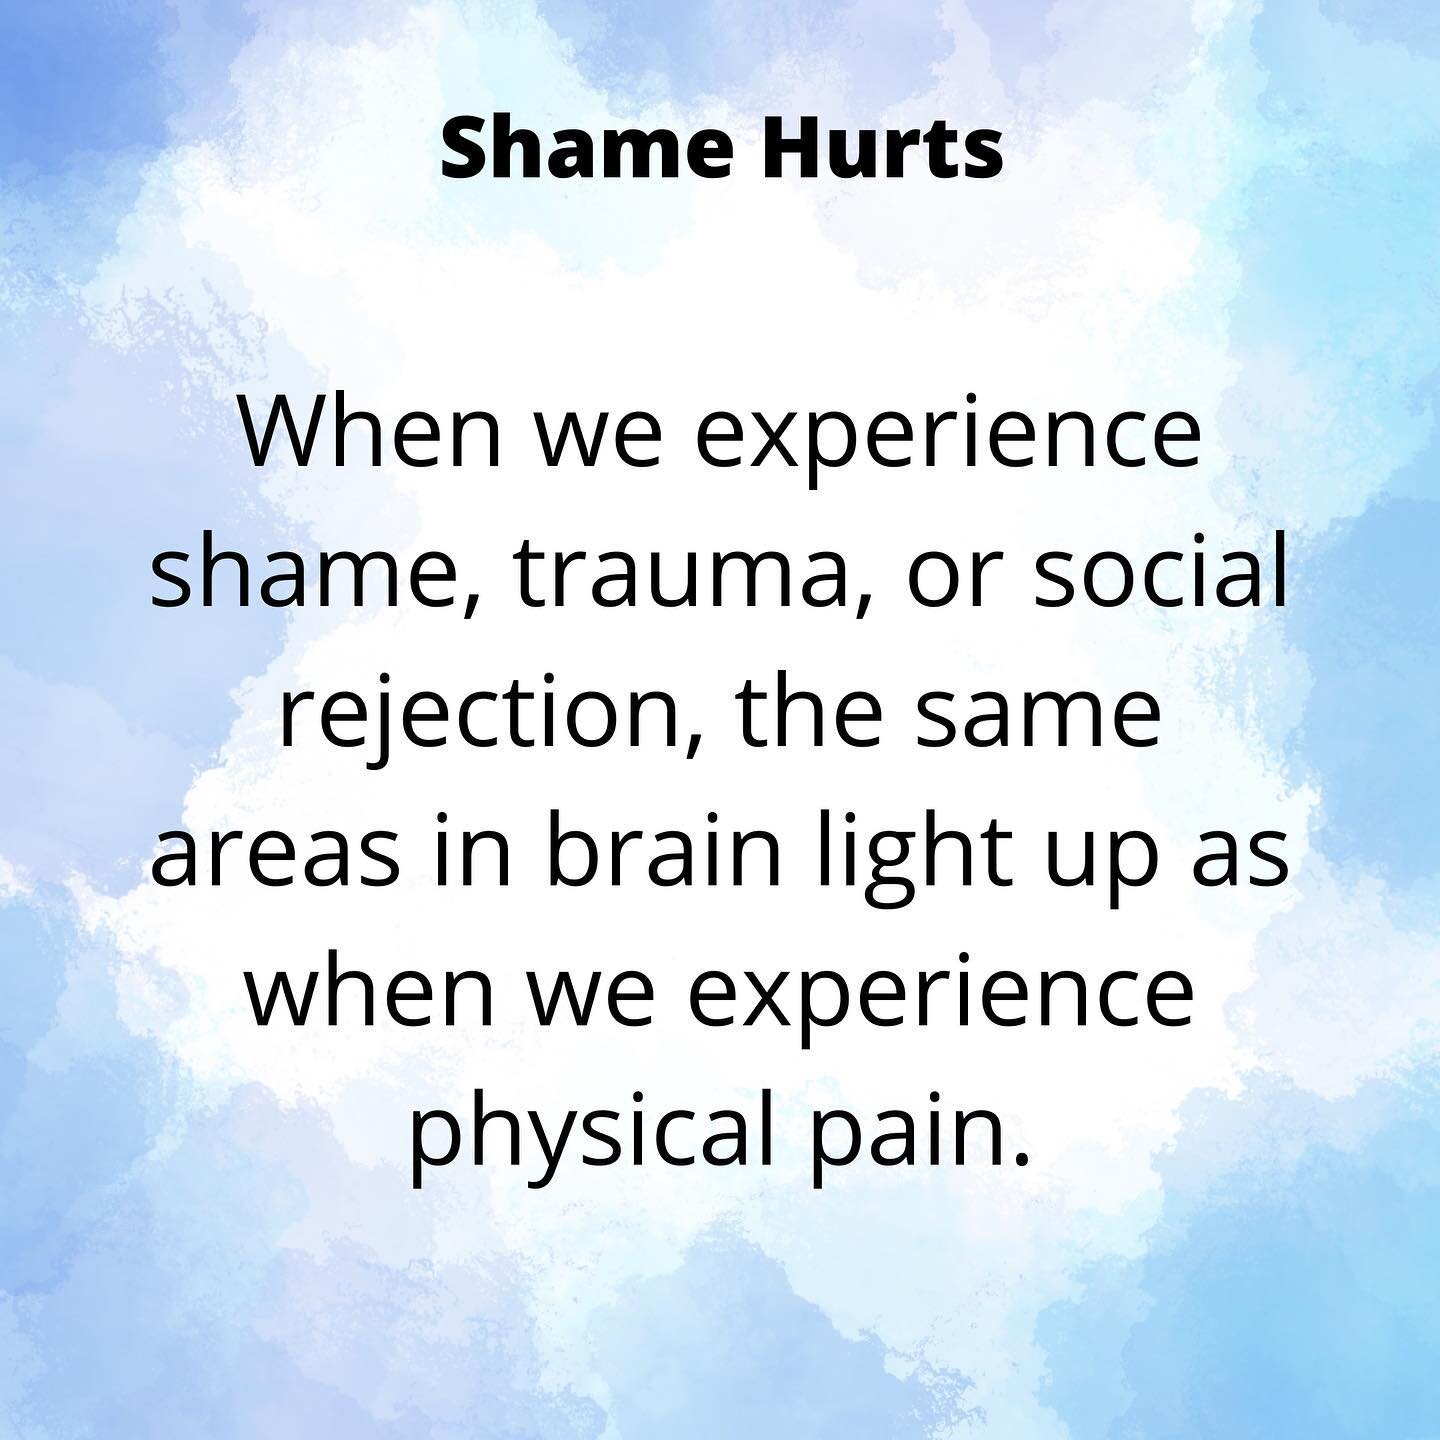 We have all experienced the intense feeling of being rejected or feeling ashamed. It affects our minds and our bodies. In our healing, we may experience emotional and physical relief. #anxietyrelief #depression #wellnessjourney #selfcarethreads #coun